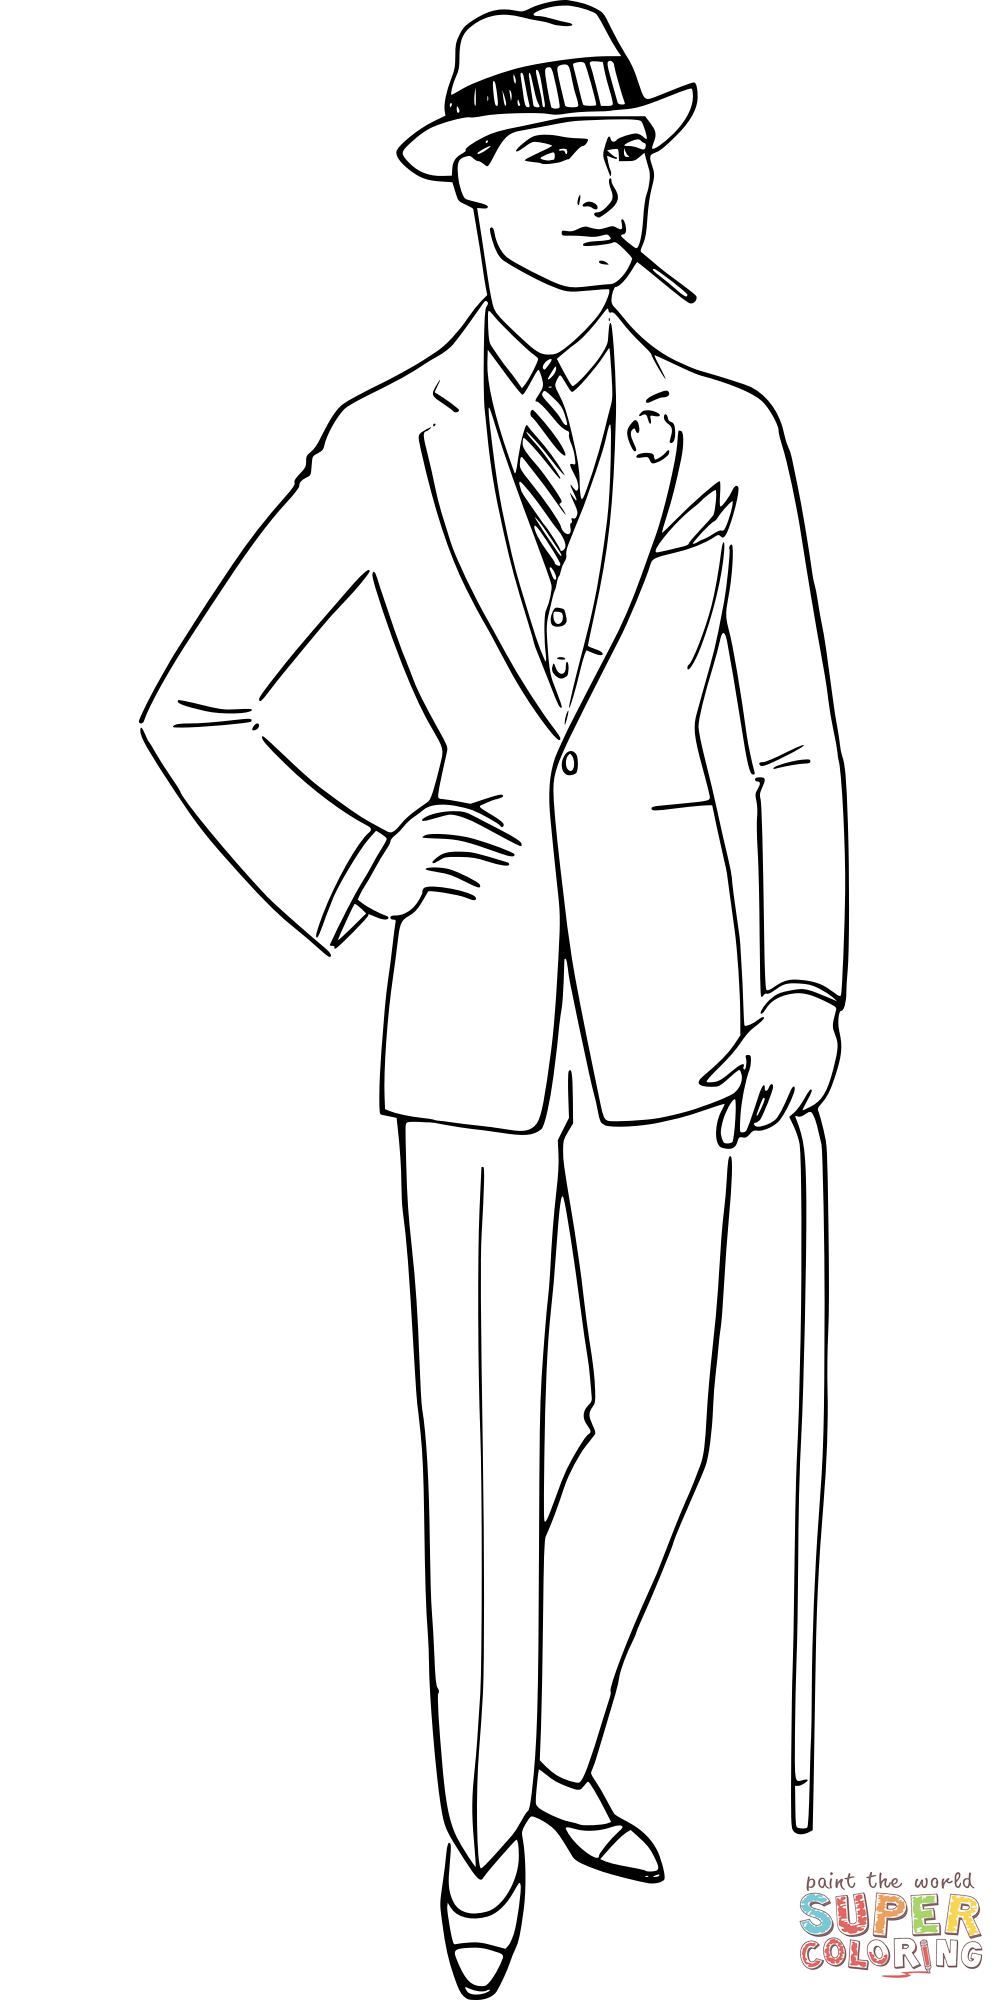 Vintage Man in a White Suit coloring page | Free Printable Coloring Pages